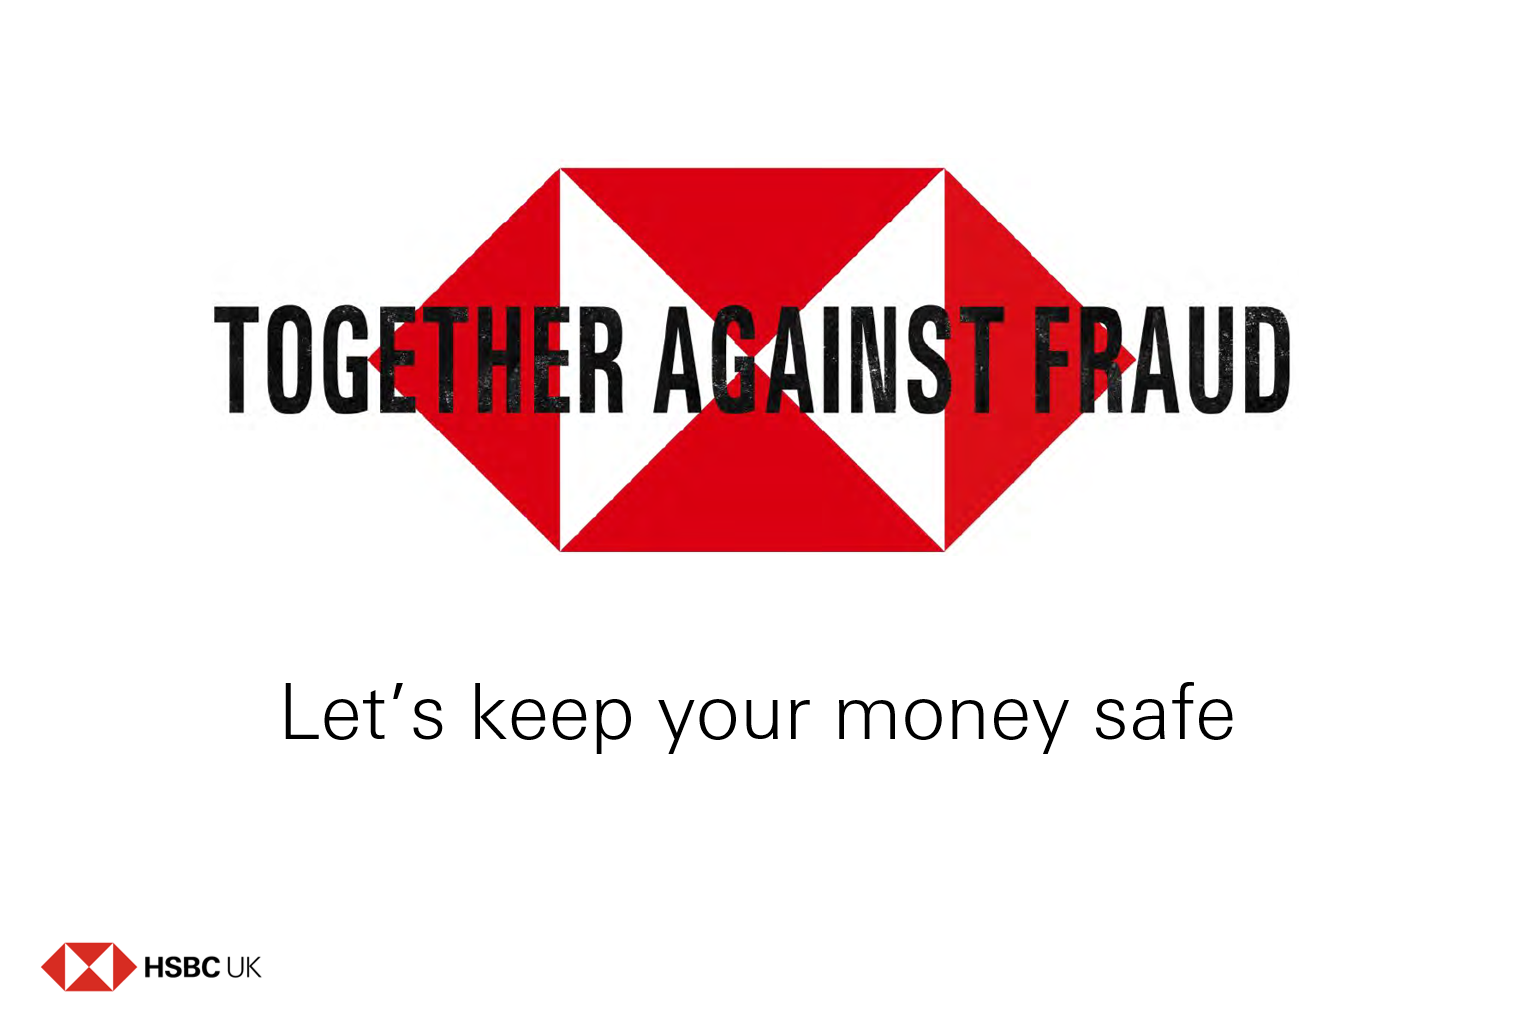 The HSBC logo with Together Against Fraud written over it, and let's keep your money safe written beneath it